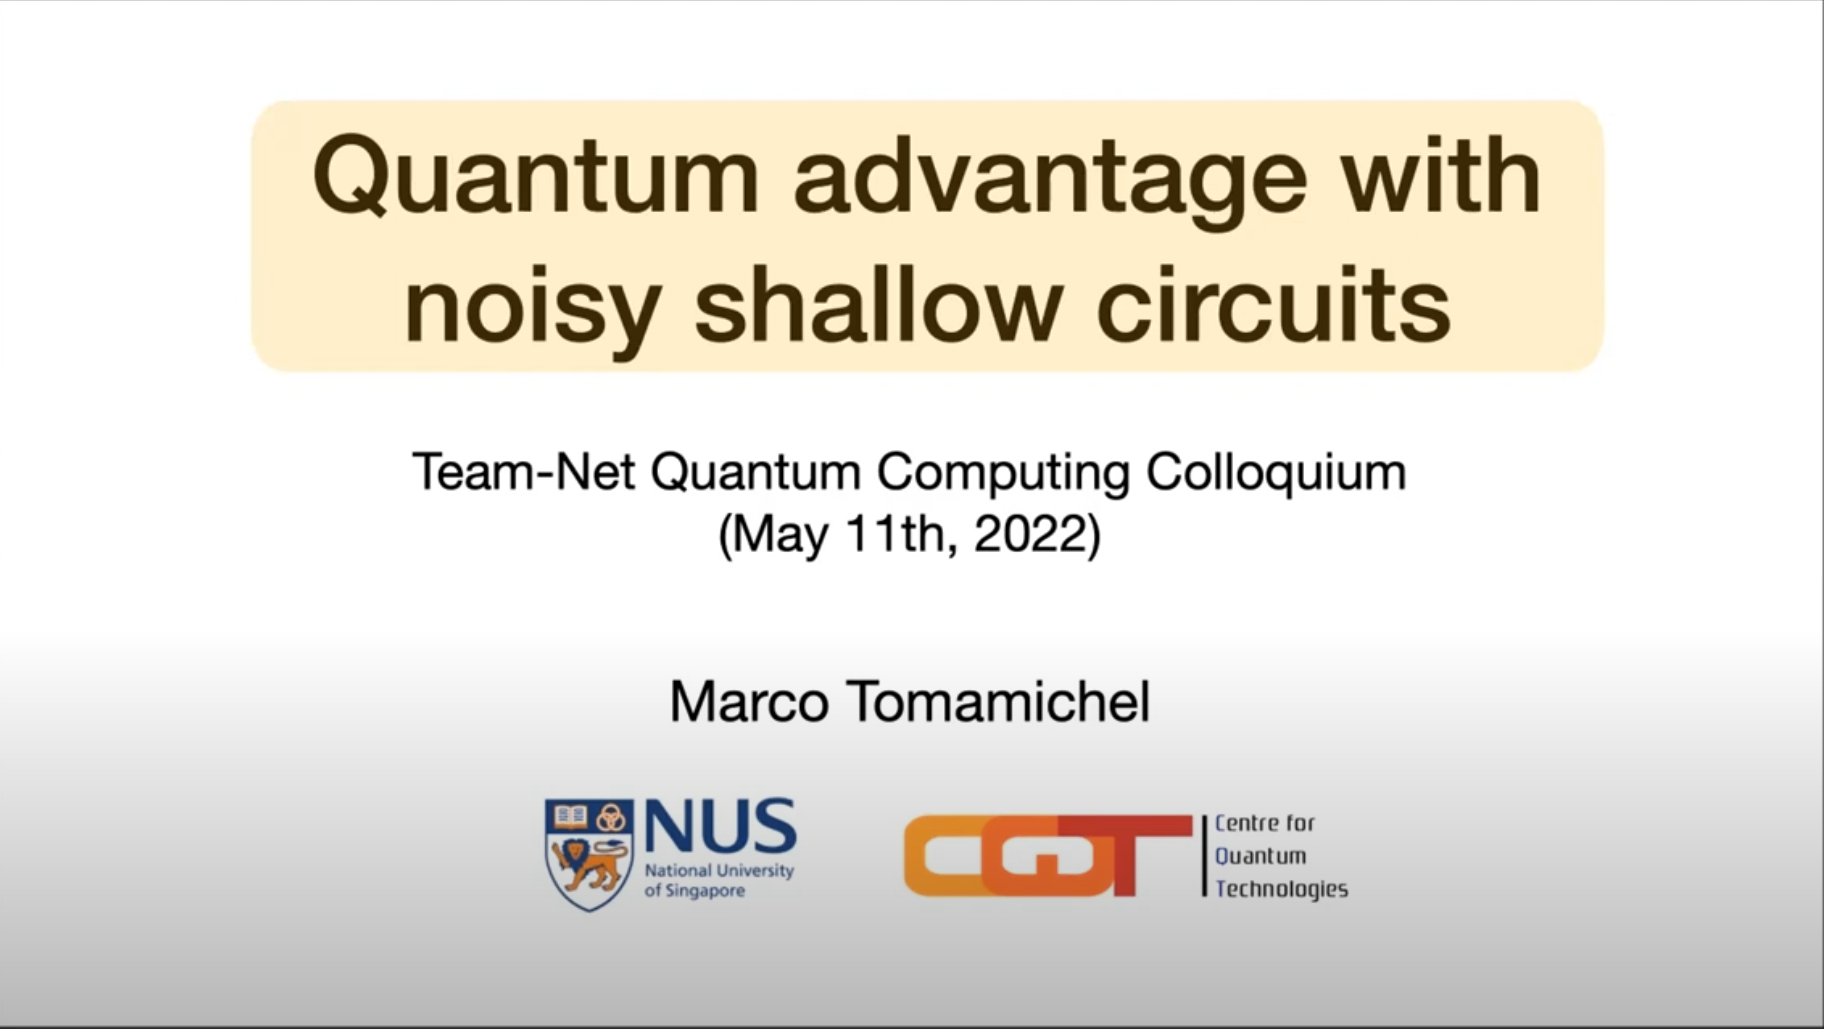 Marco Tomamichel (National University of Singapore): Quantum advantage with noisy shallow circuits